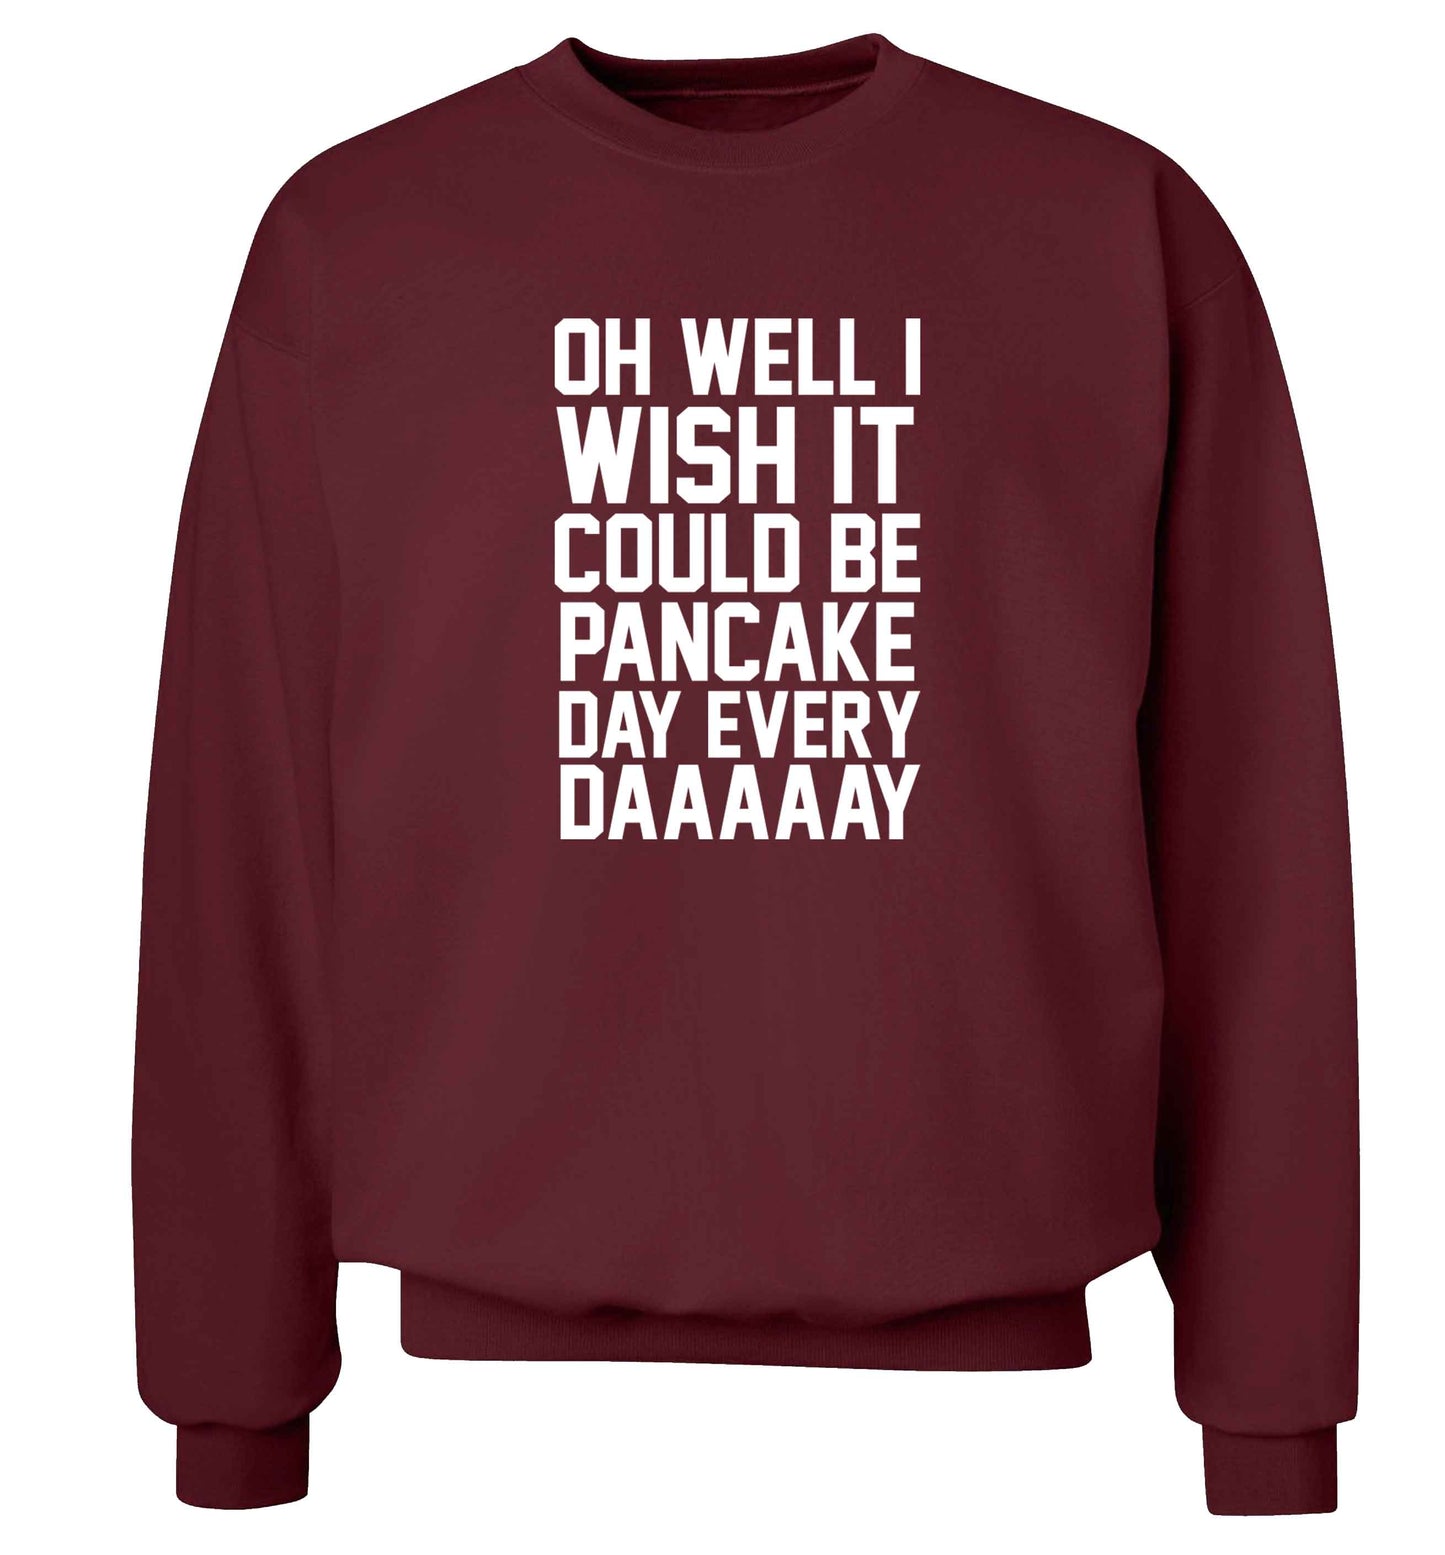 Oh well I wish it could be pancake day every day adult's unisex maroon sweater 2XL